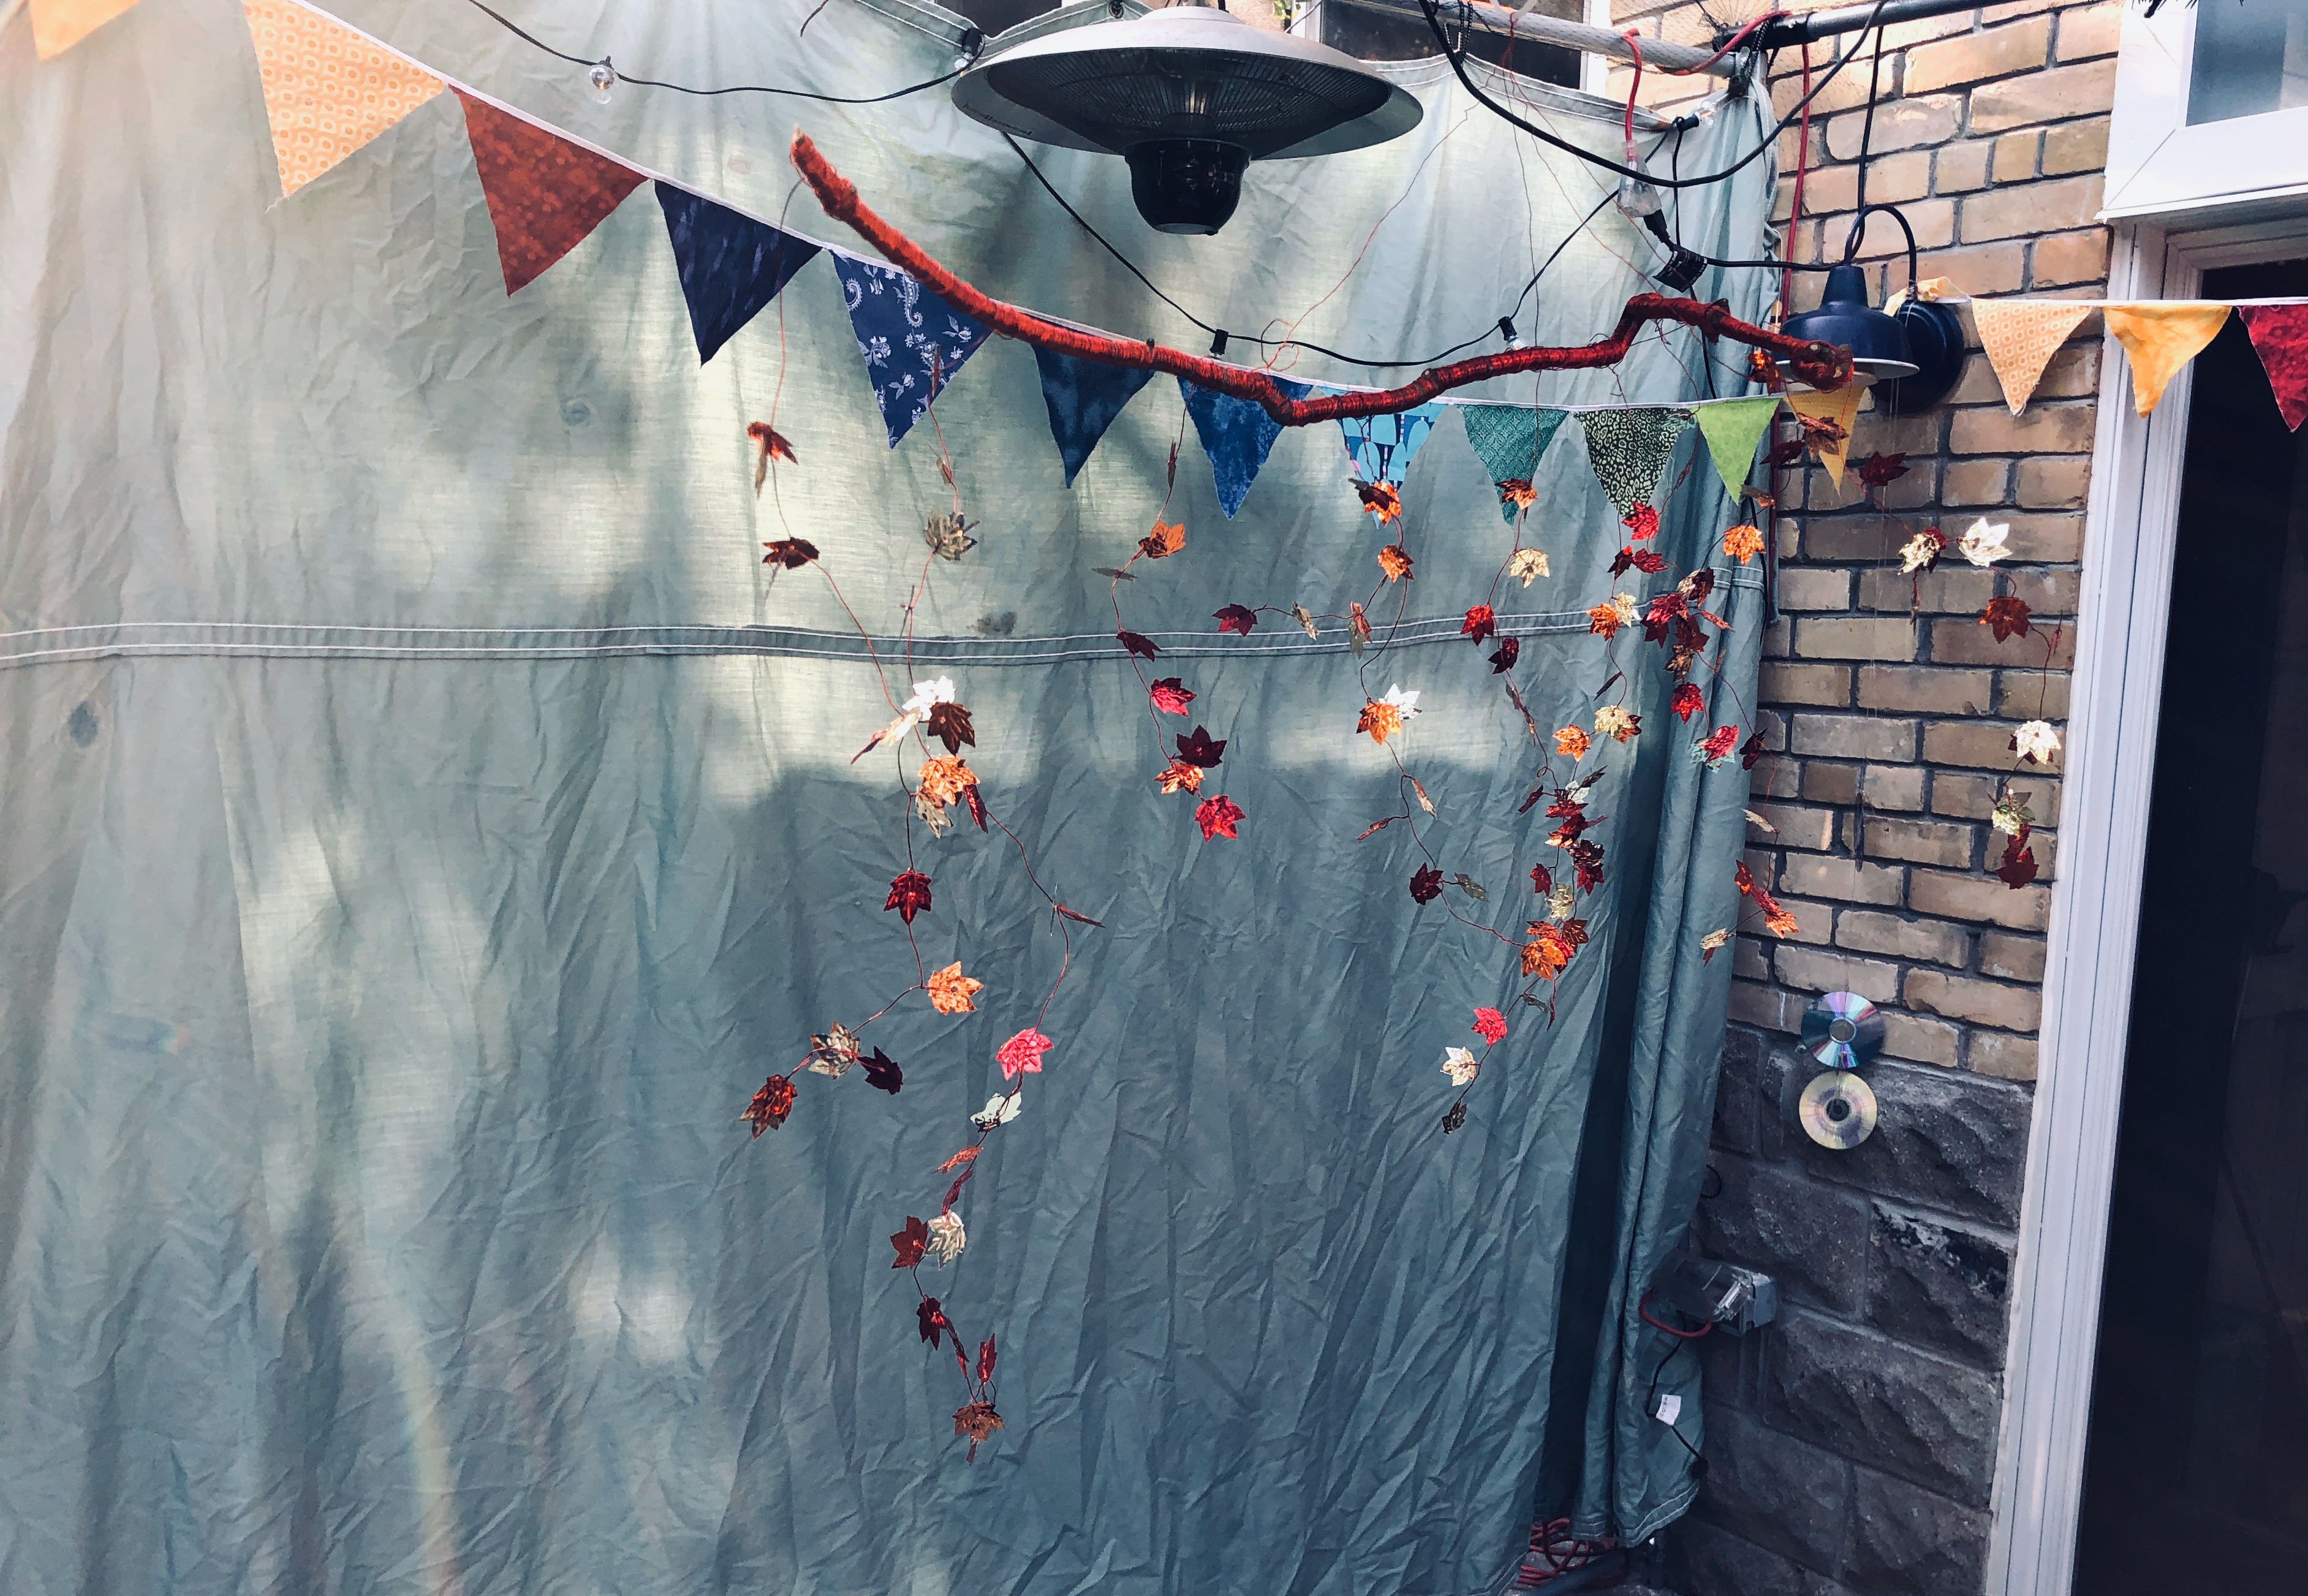 Inside the sukkah: canvas wall, fabric bunting, string lights, and a mobile made of metallic foil maple leaves and a wire-wrapped tree branch.